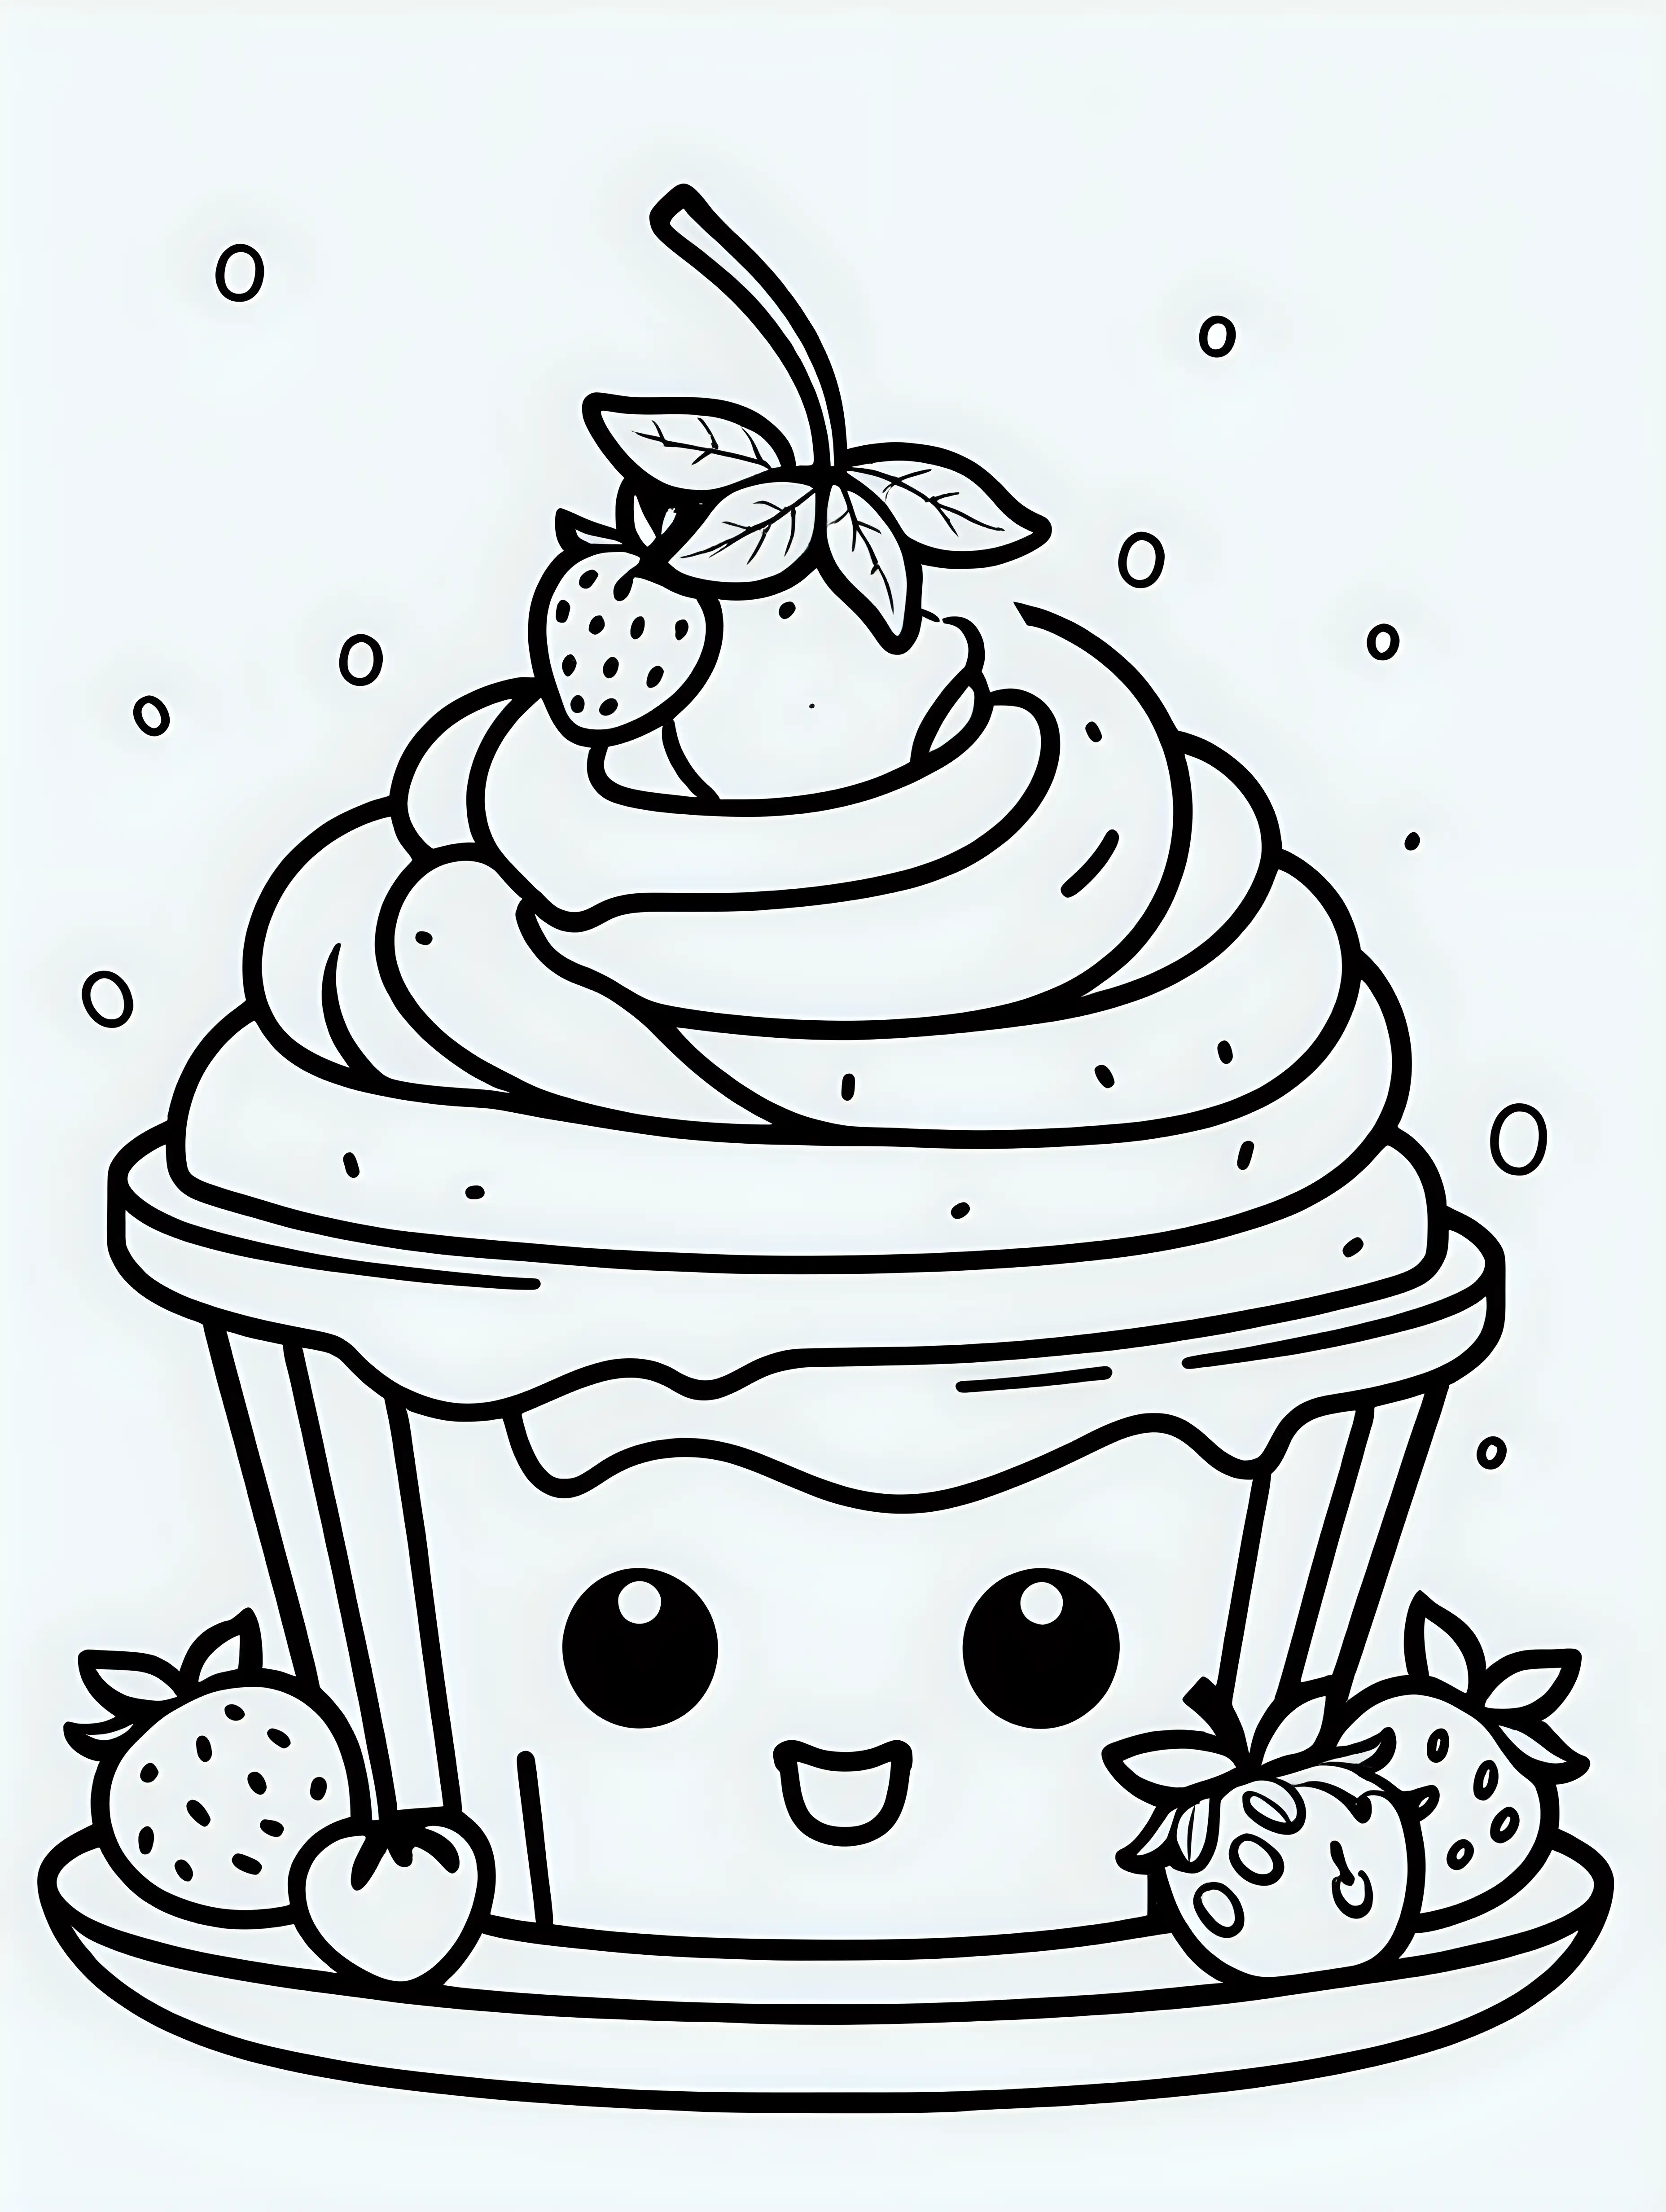 Cute Cartoon Dessert Coloring Book BerryTopped Delight on White Background